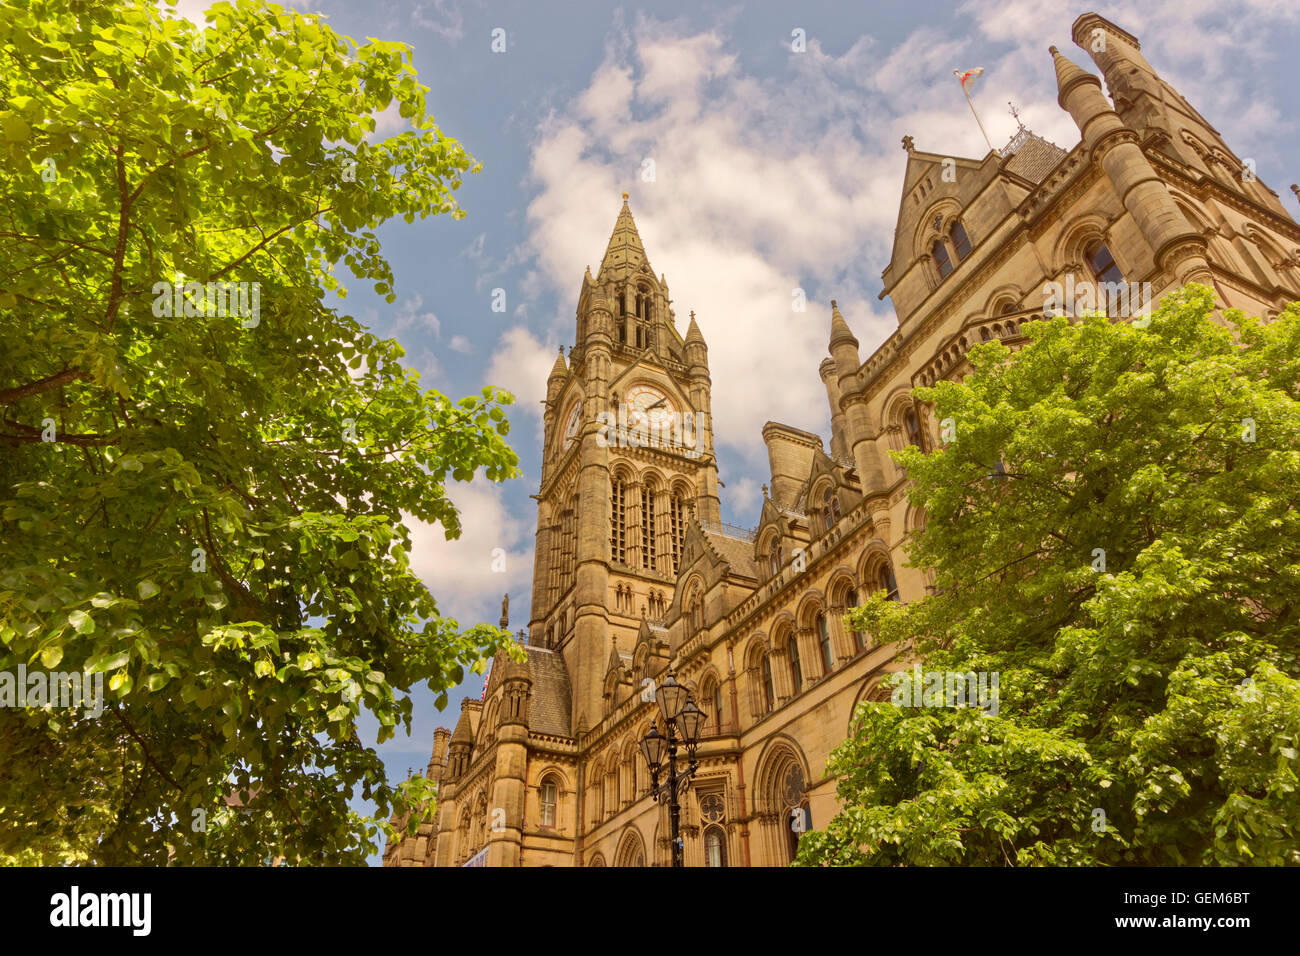 Manchester Town Hall, Albert Square, Manchester City Centre, England. Stock Photo